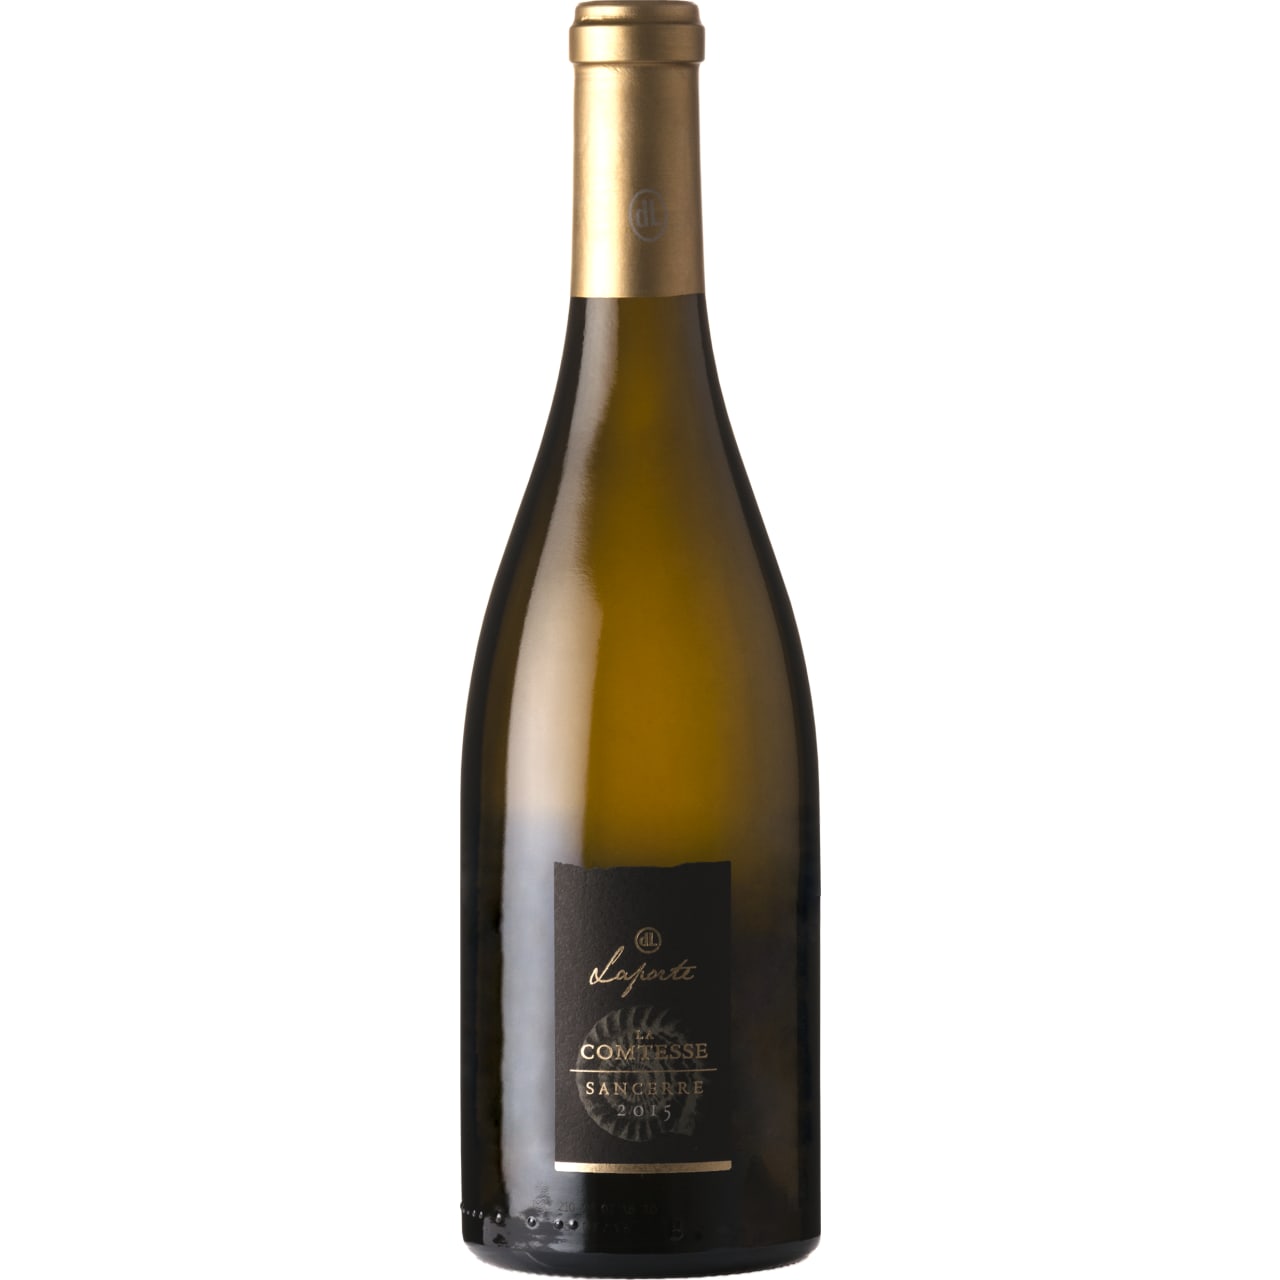 A wonderfully opulent style of Sancerre: rich, rounded and exquisitely expressive.